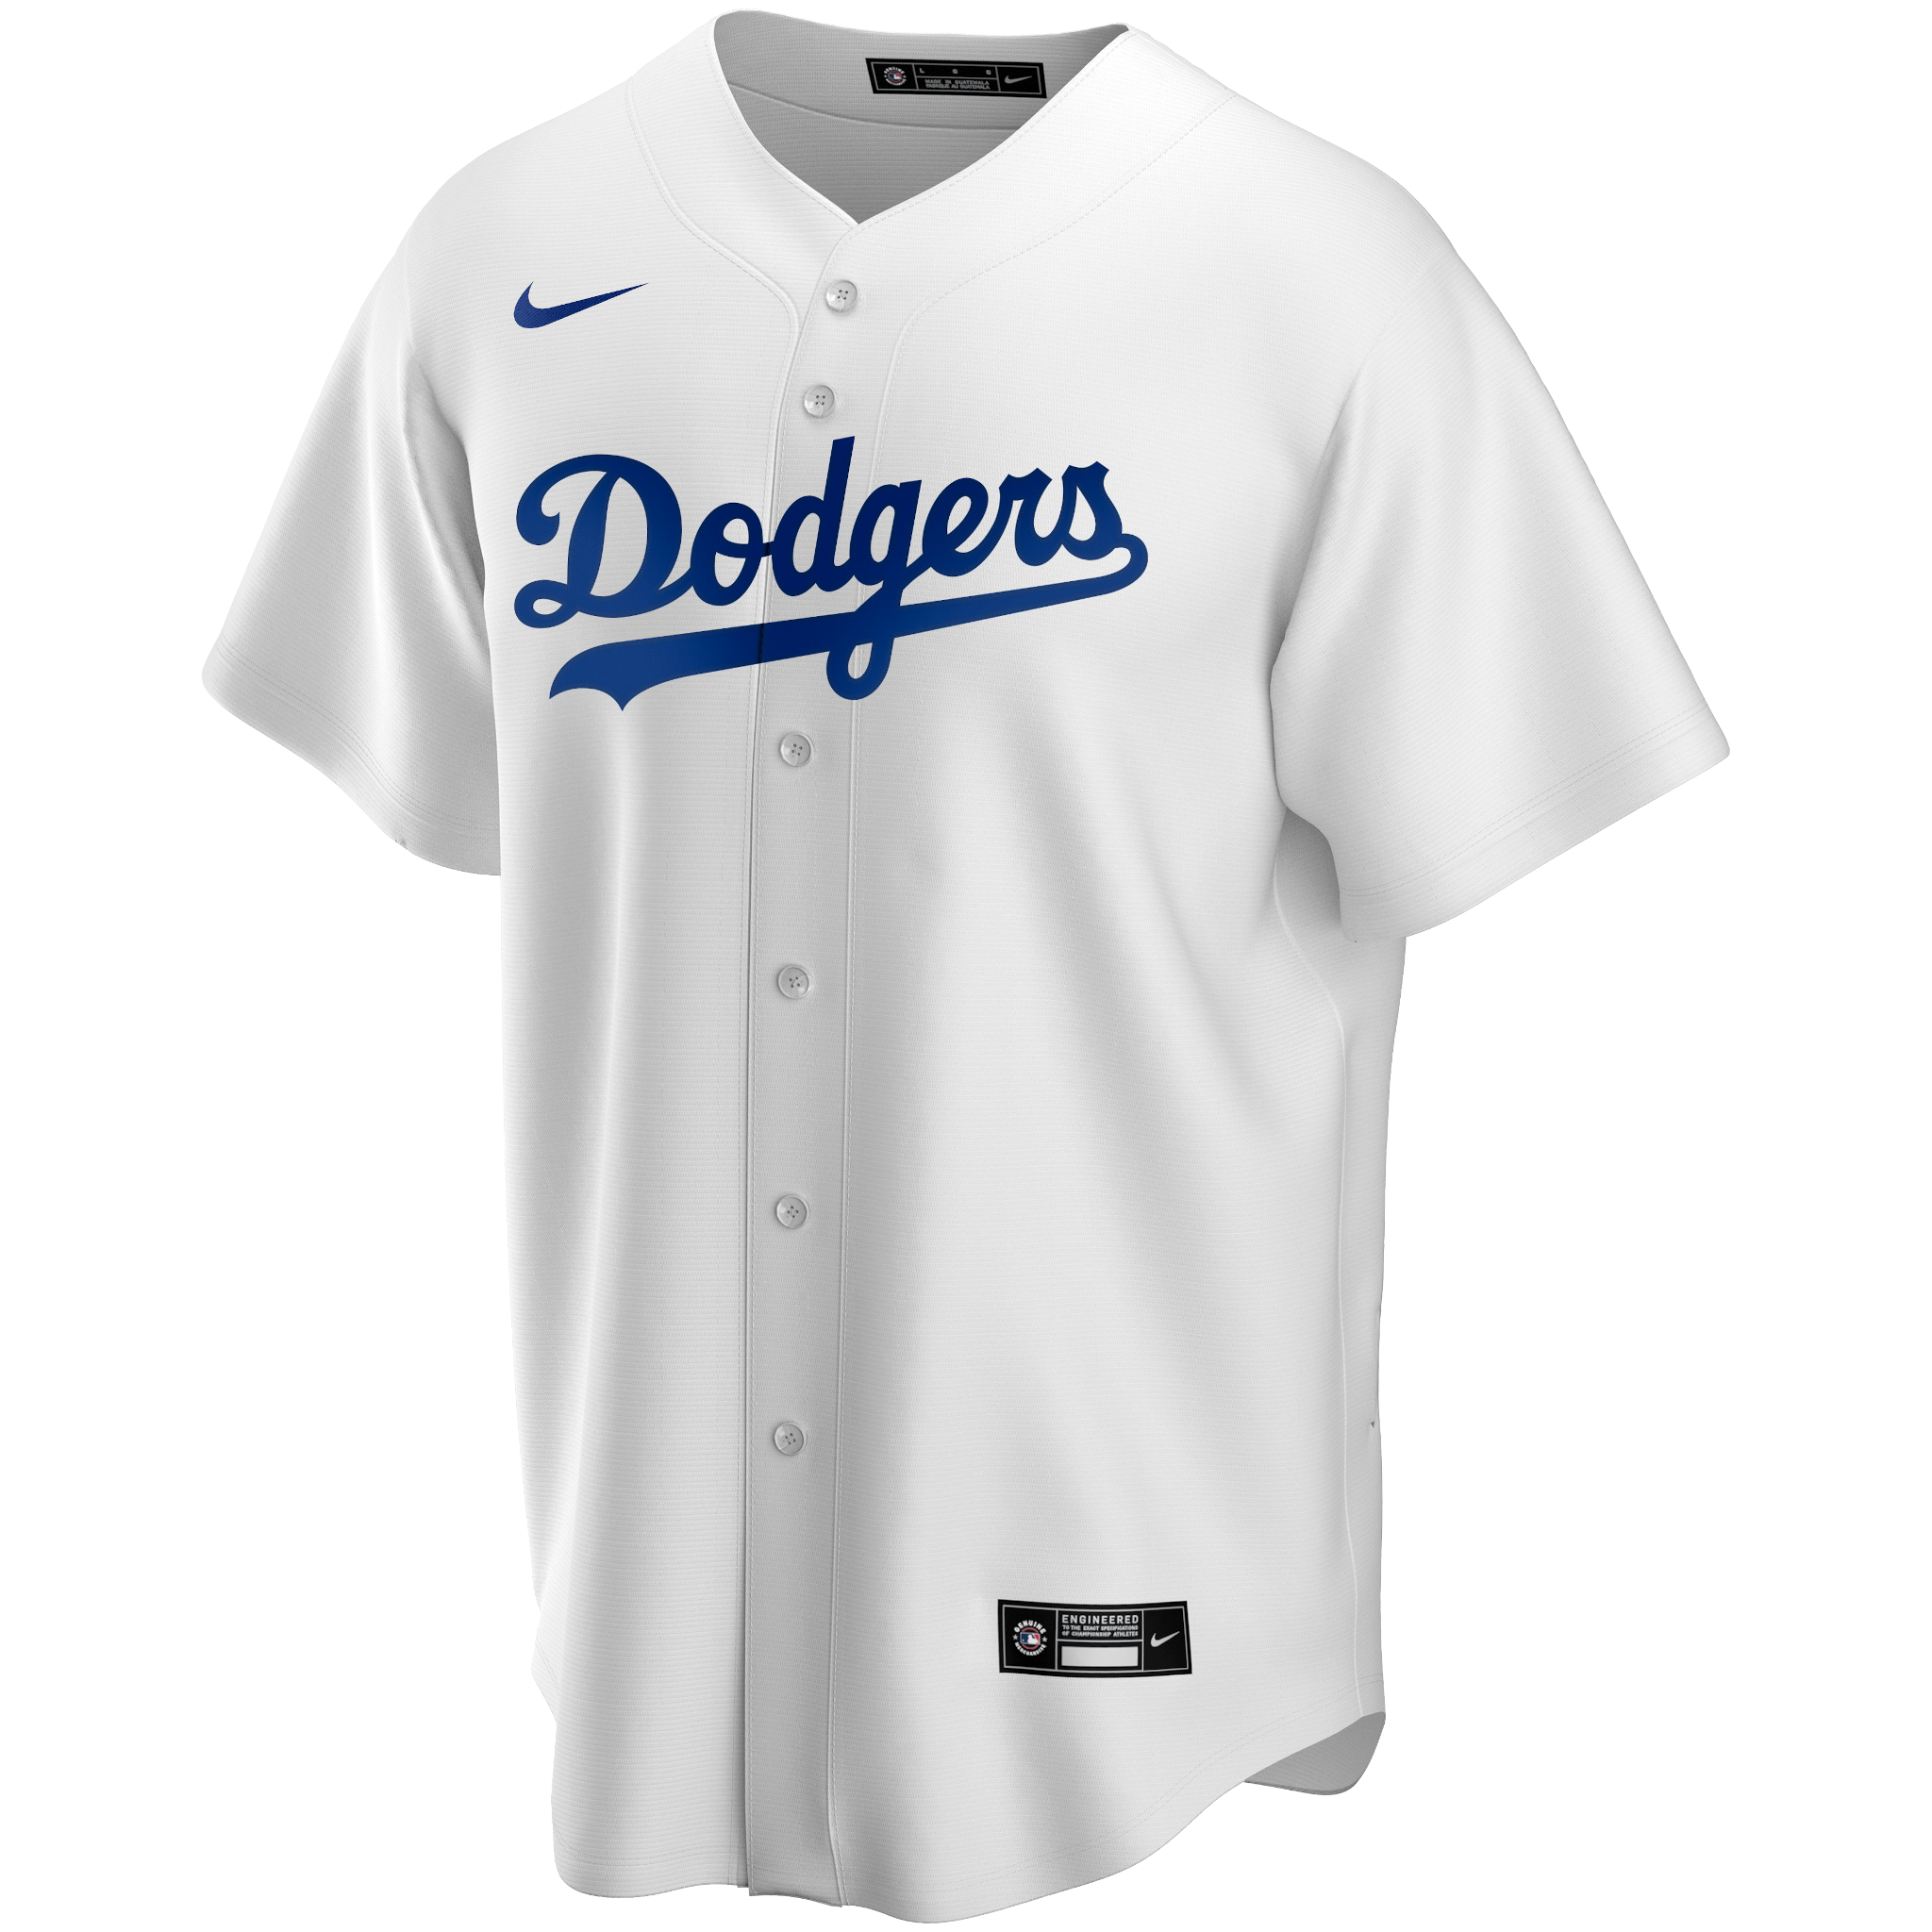 NHL MLB Replica Dodgers Hockey Jersey. Choose Color, Size, any Name, and  Number